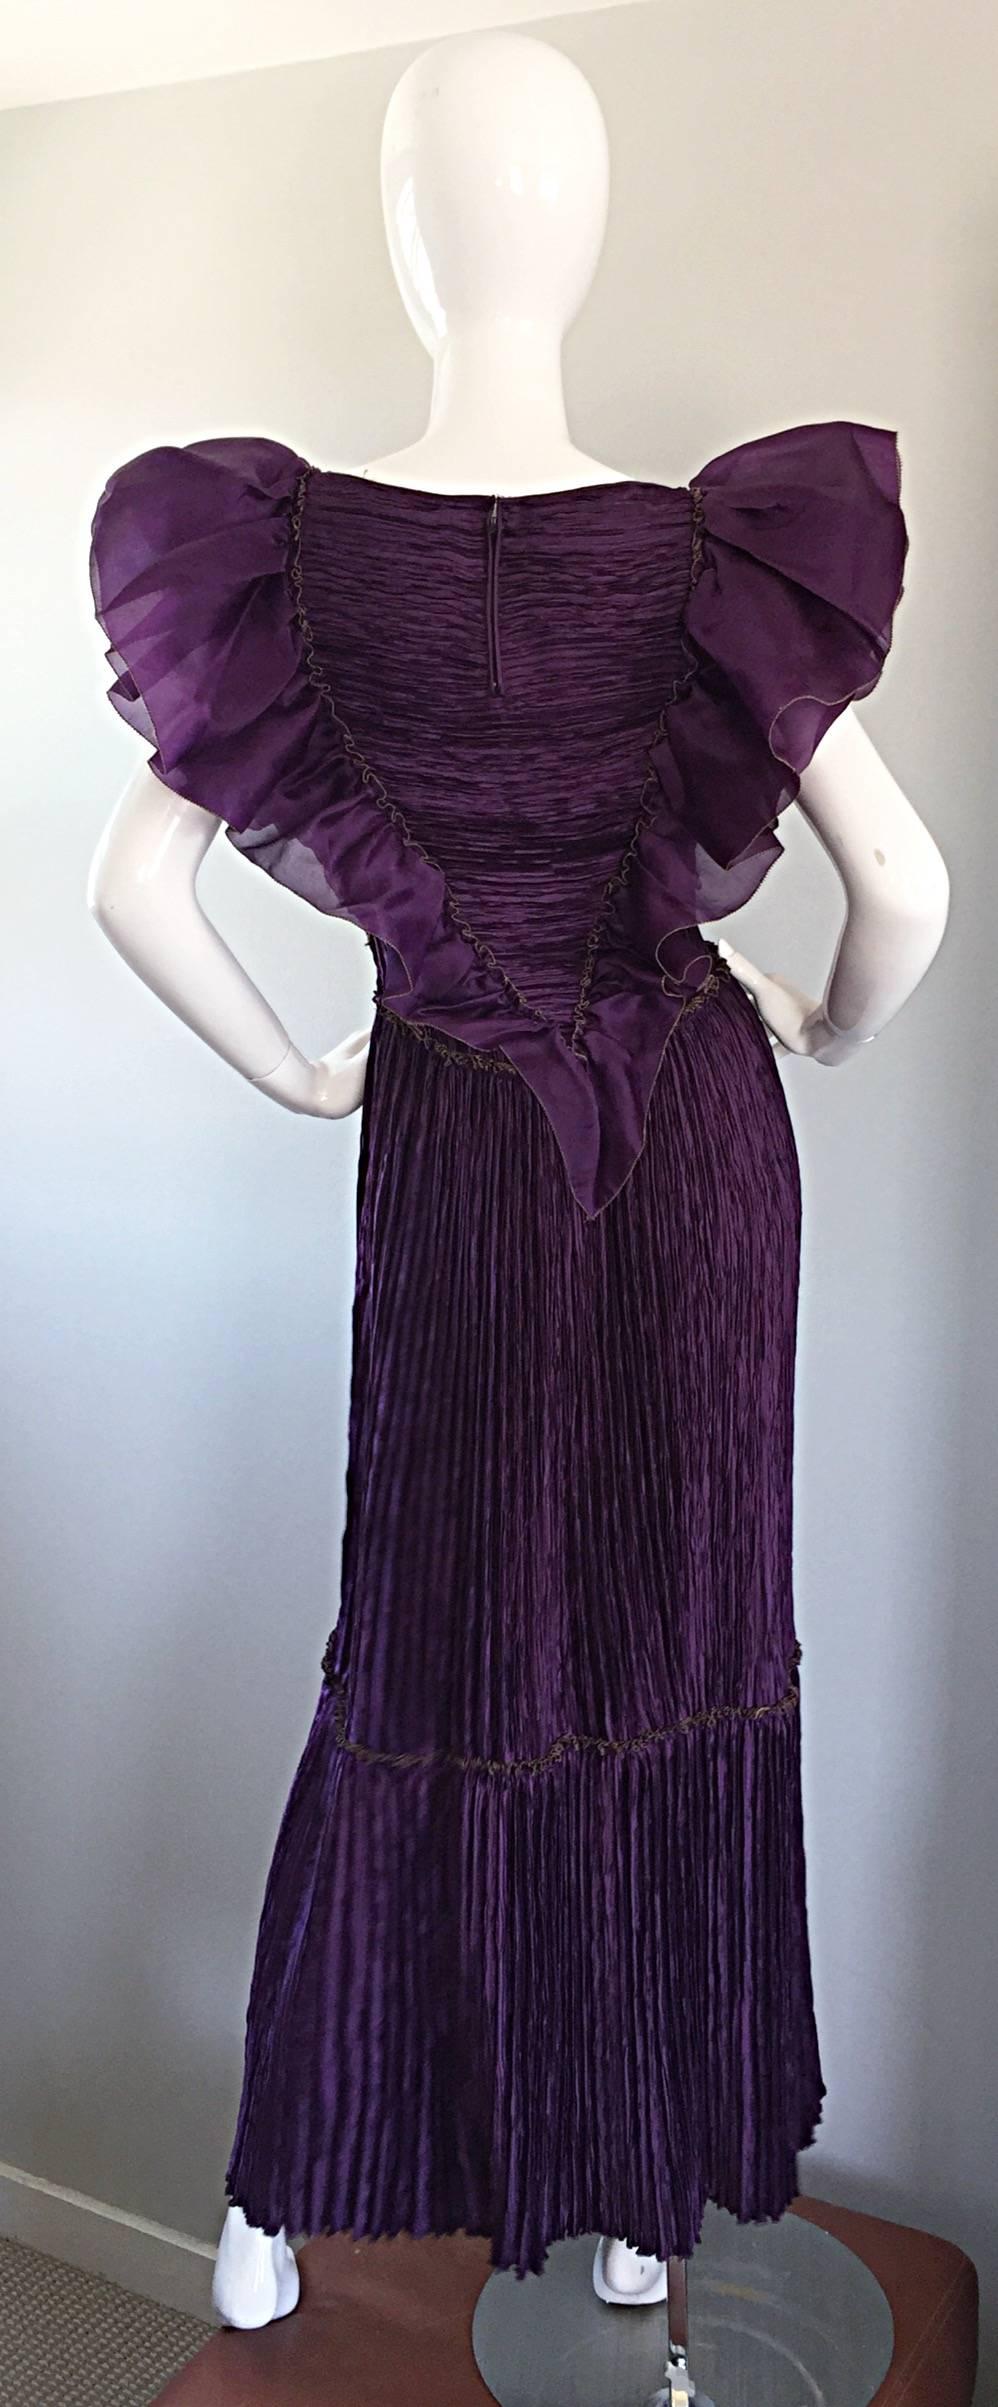 Mary McFadden Couture for Bonwit Teller 80s Purple Fortuny Pleated Ruffle Dress 3